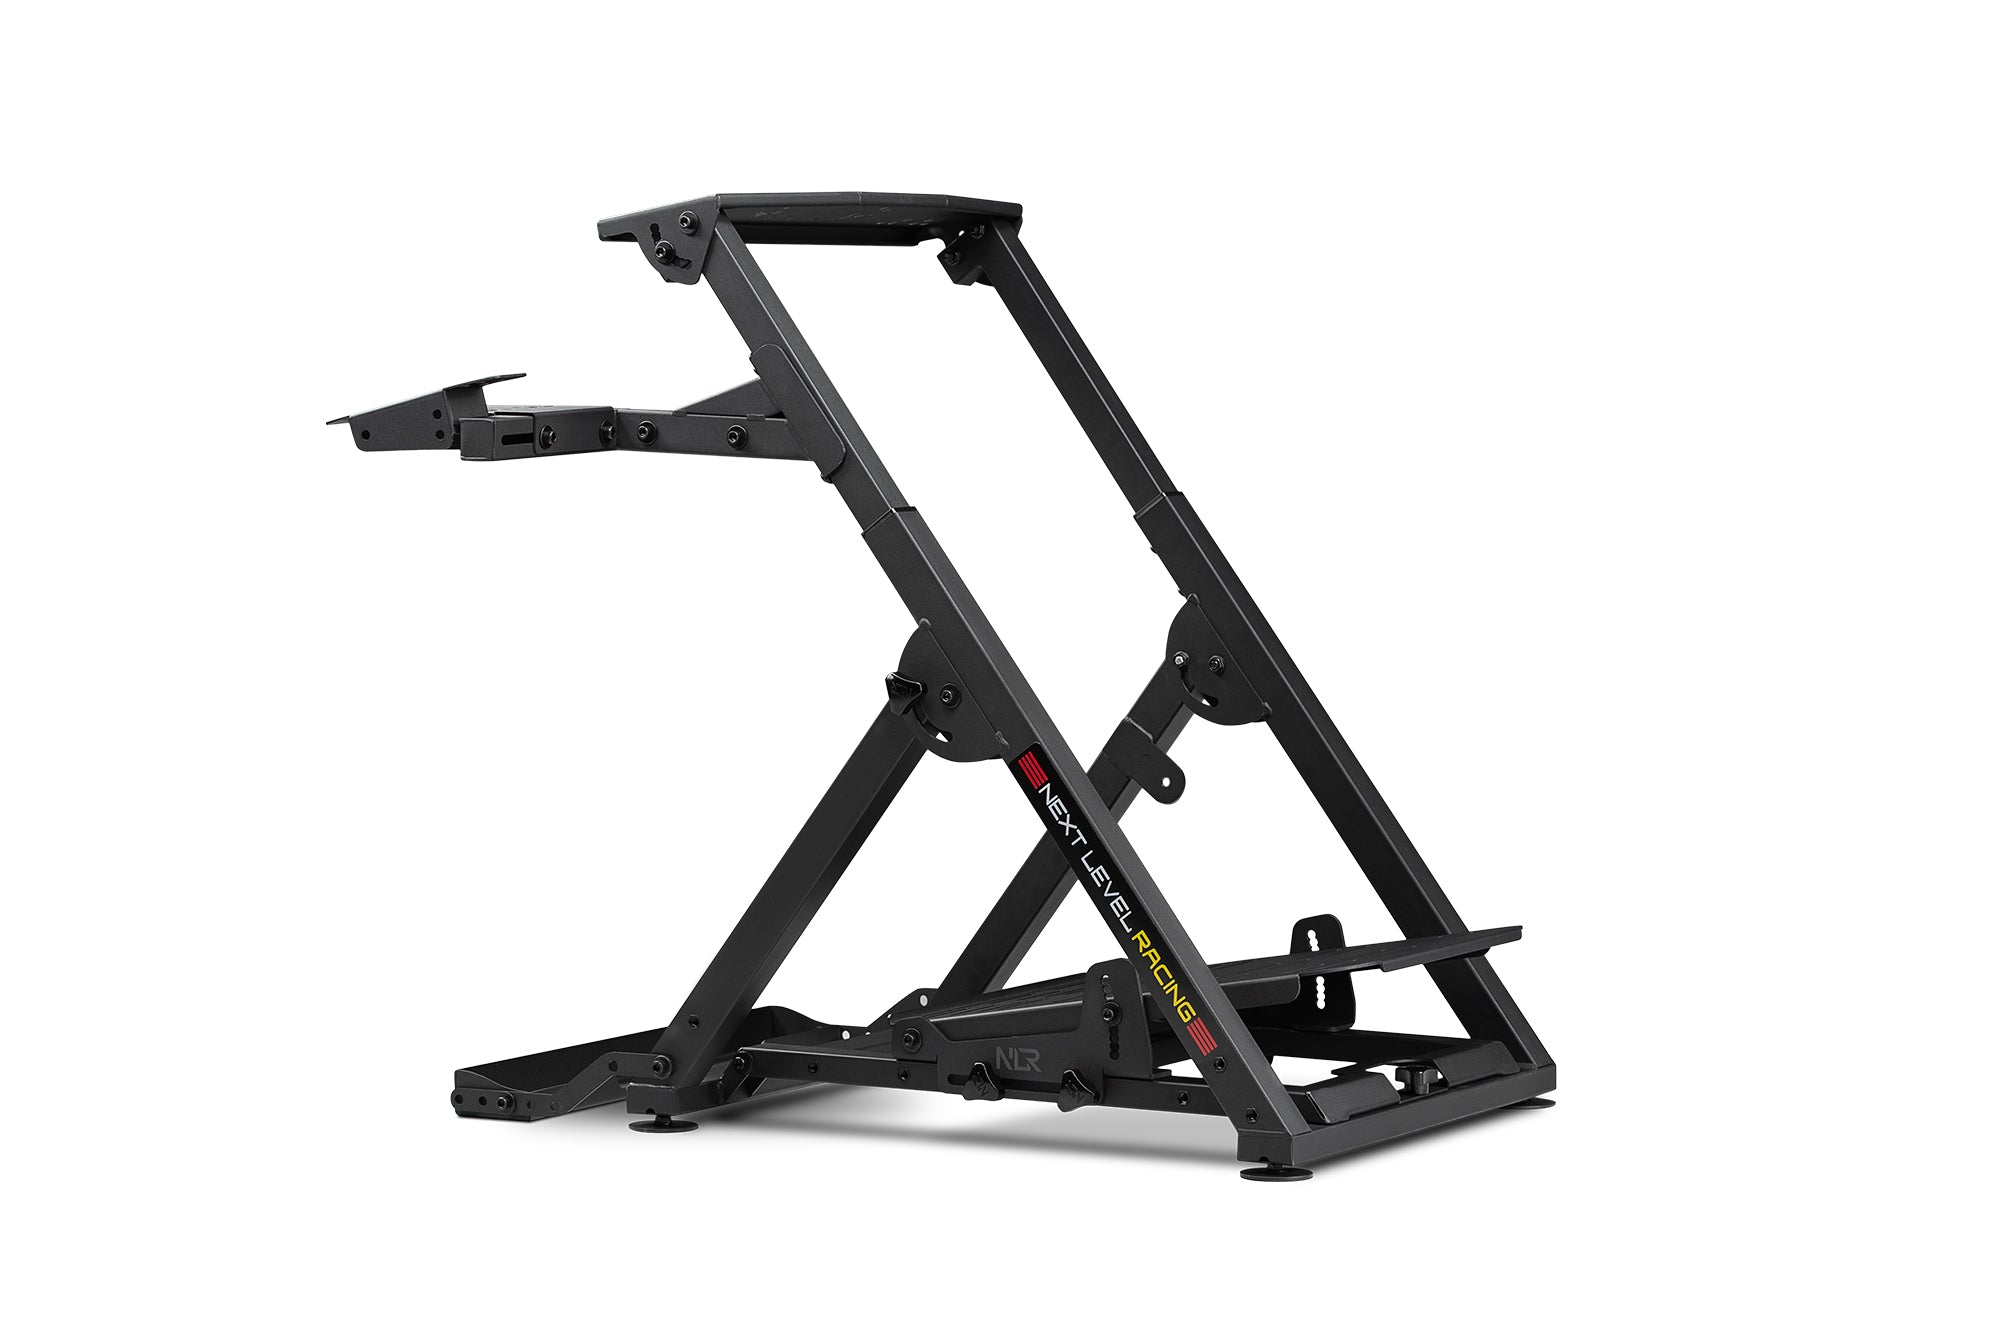  Wheel Stand Pro Super CSL Wheelstand Compatible With